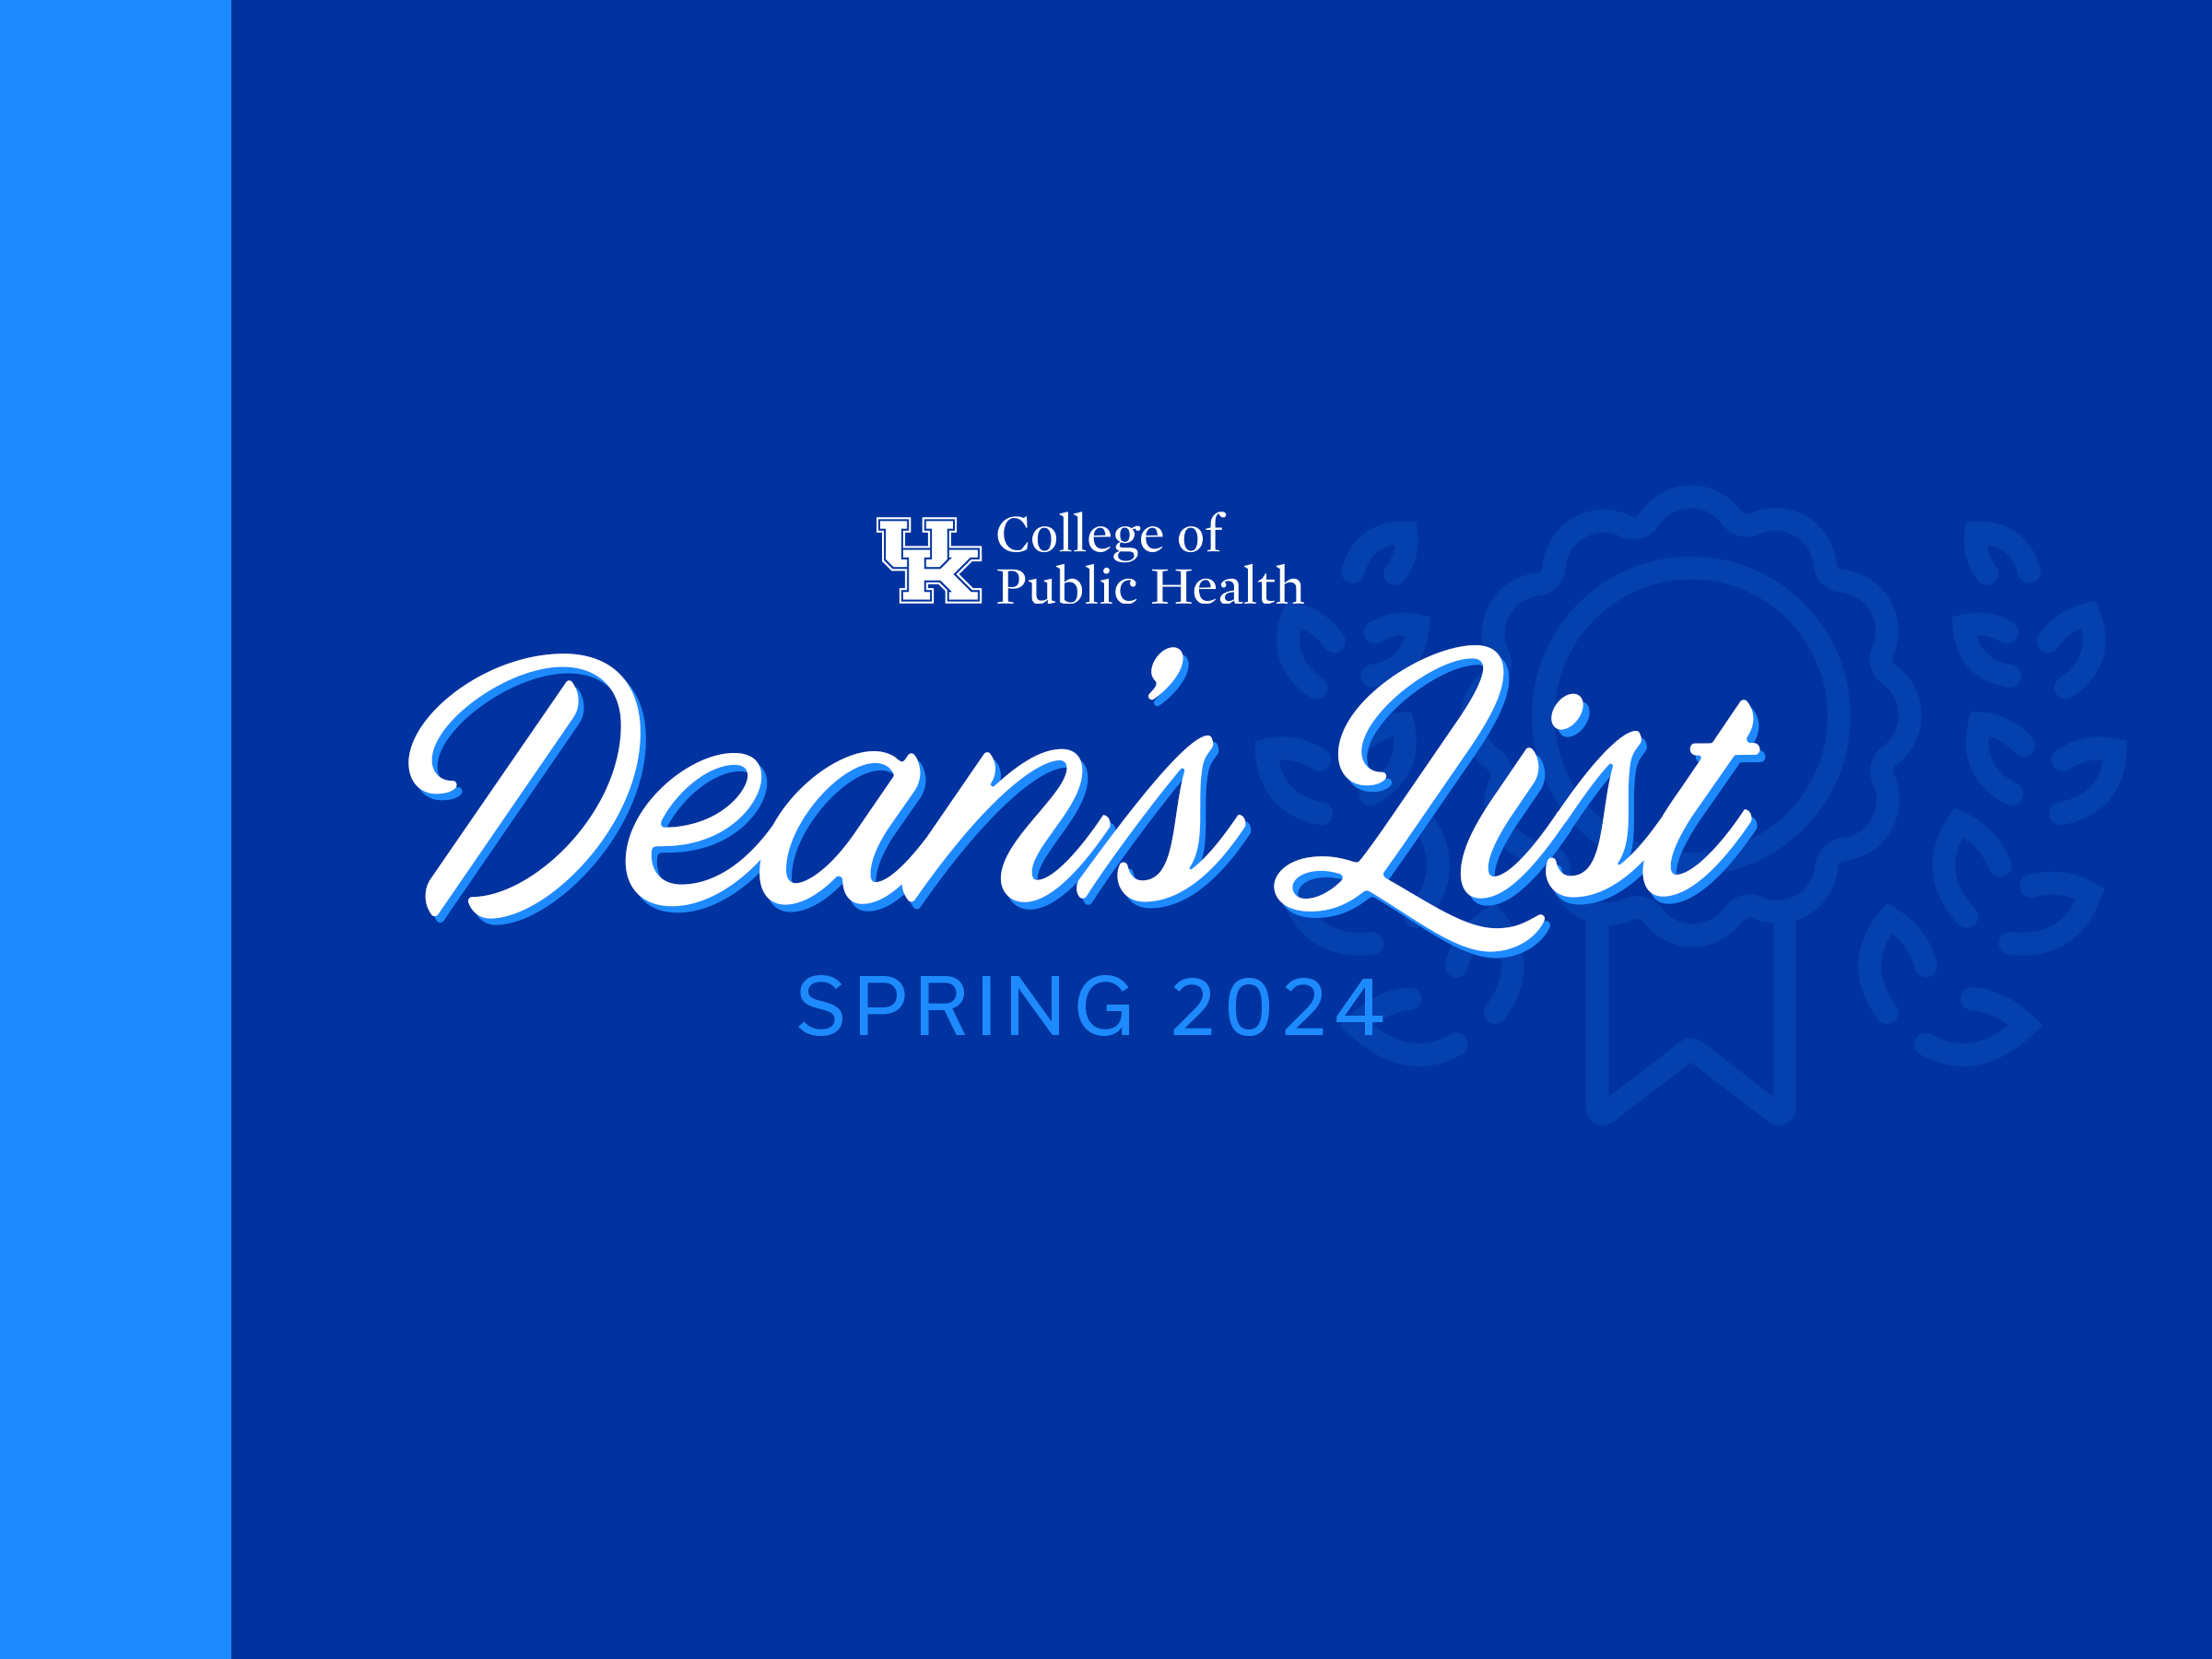 text over blue background stating "Dean's List Summer 2024"